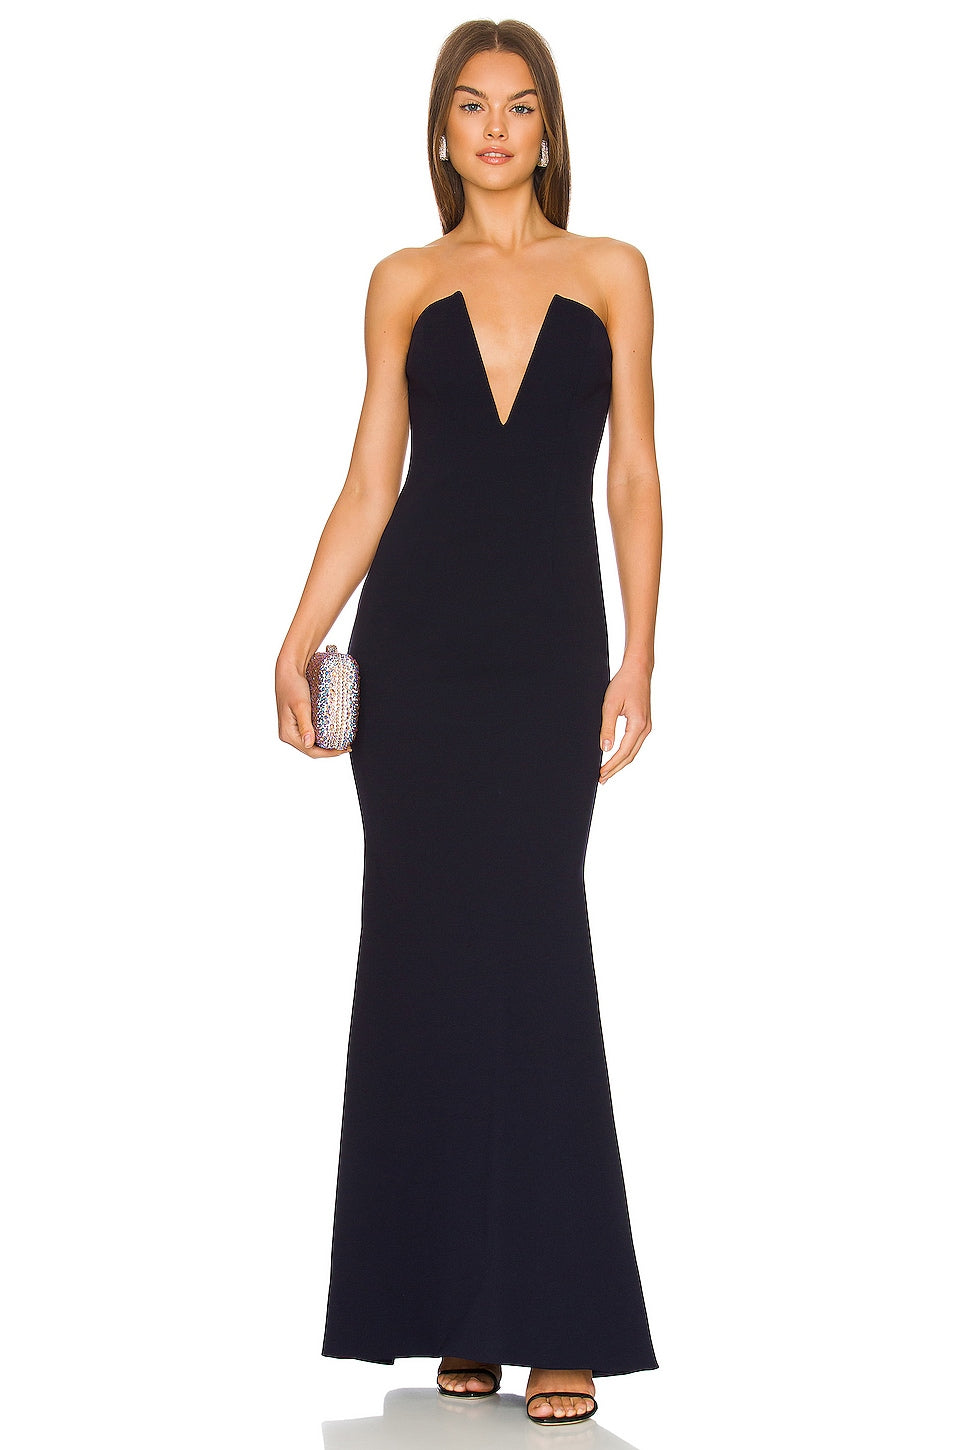 Katie May x REVOLVE Crush Gown in Navy SIZE SMALL